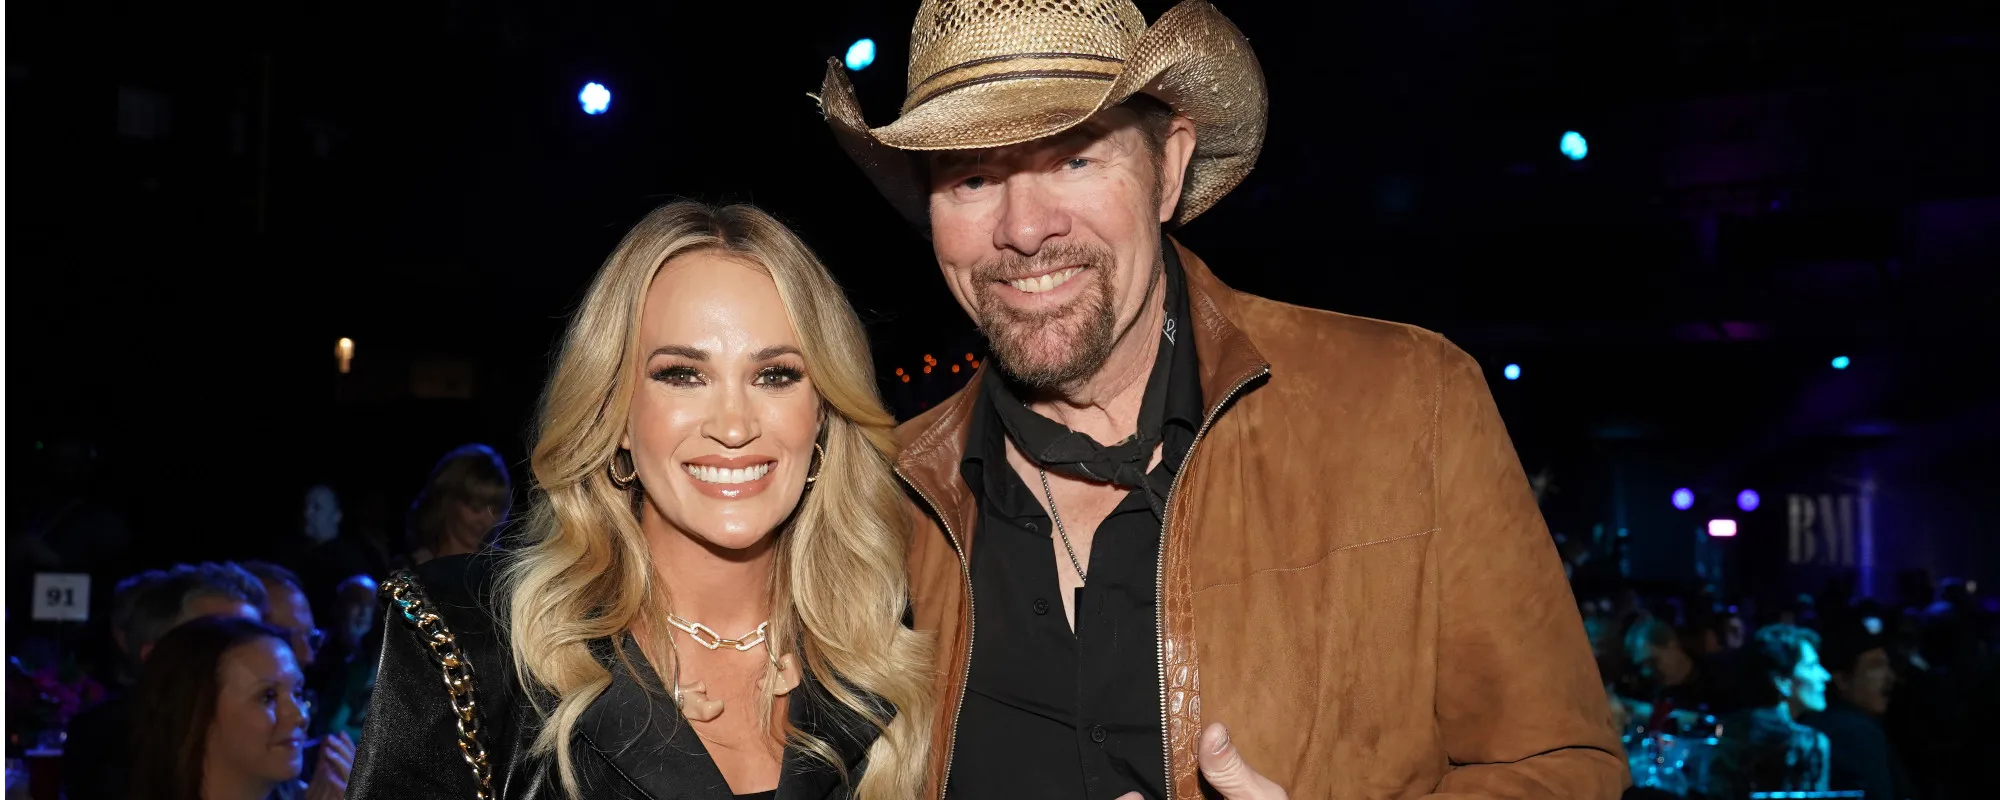 Carrie Underwood Mourns Toby Keith With Throwback Photos: “A True Blue Cowboy Just Made His Ride up to Heaven”